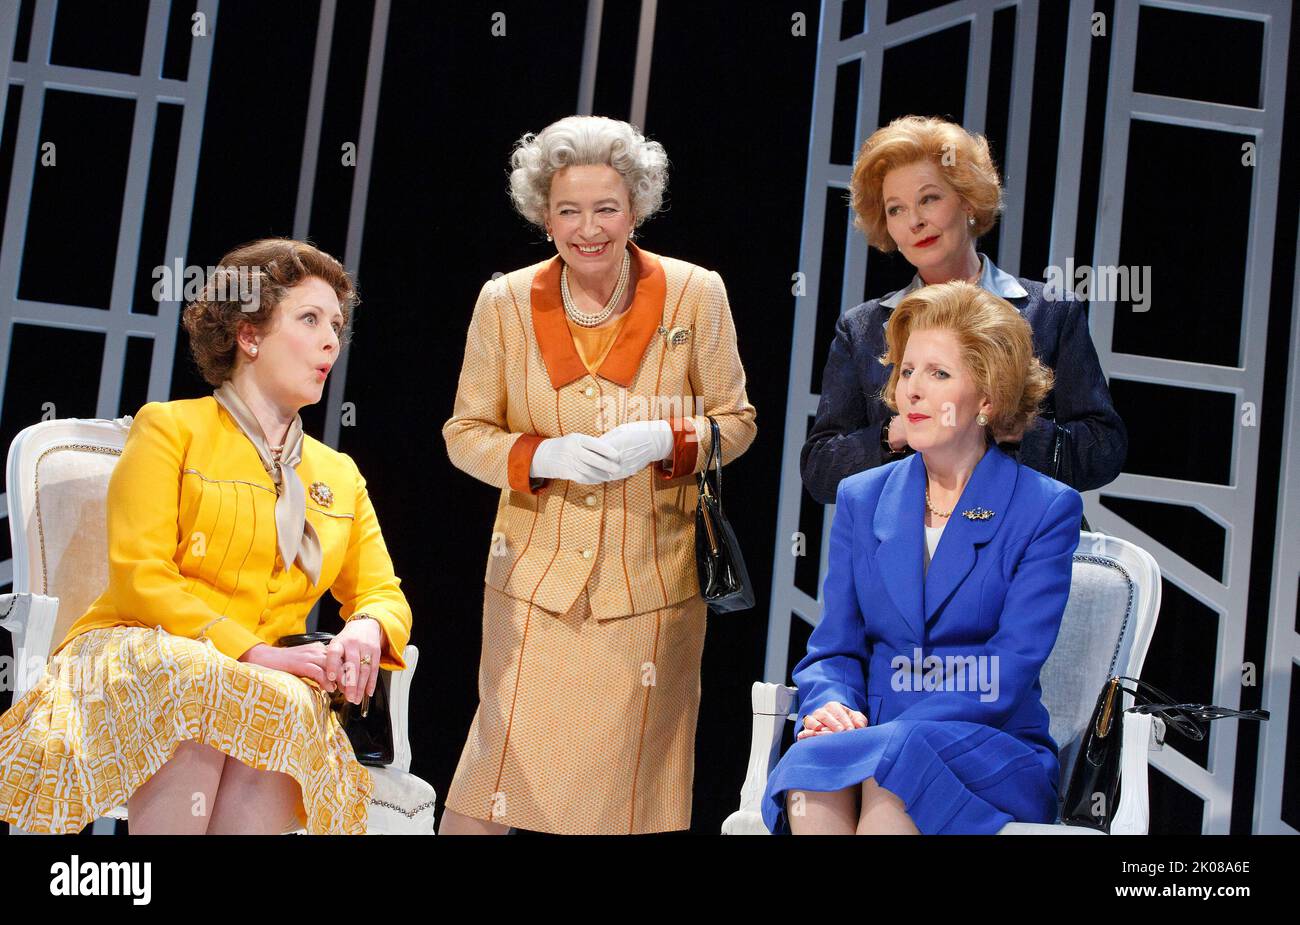 l-r: Lucy Robinson (Liz - Younger Queen), Marion Bailey (Q - Older Queen), (rear) Stella Gonet (T - Older Thatcher), Fenella Woolgar (Mags - Younger Thatcher) in HANDBAGGED by Moira Buffini at the Vaudeville Theatre, London WC2   10/04/2014   a Tricycle Theatre, London NW6 2013 production  design: Richard Kent  lighting: Oliver Fenwick  director: Indhu Rubasingham Stock Photo